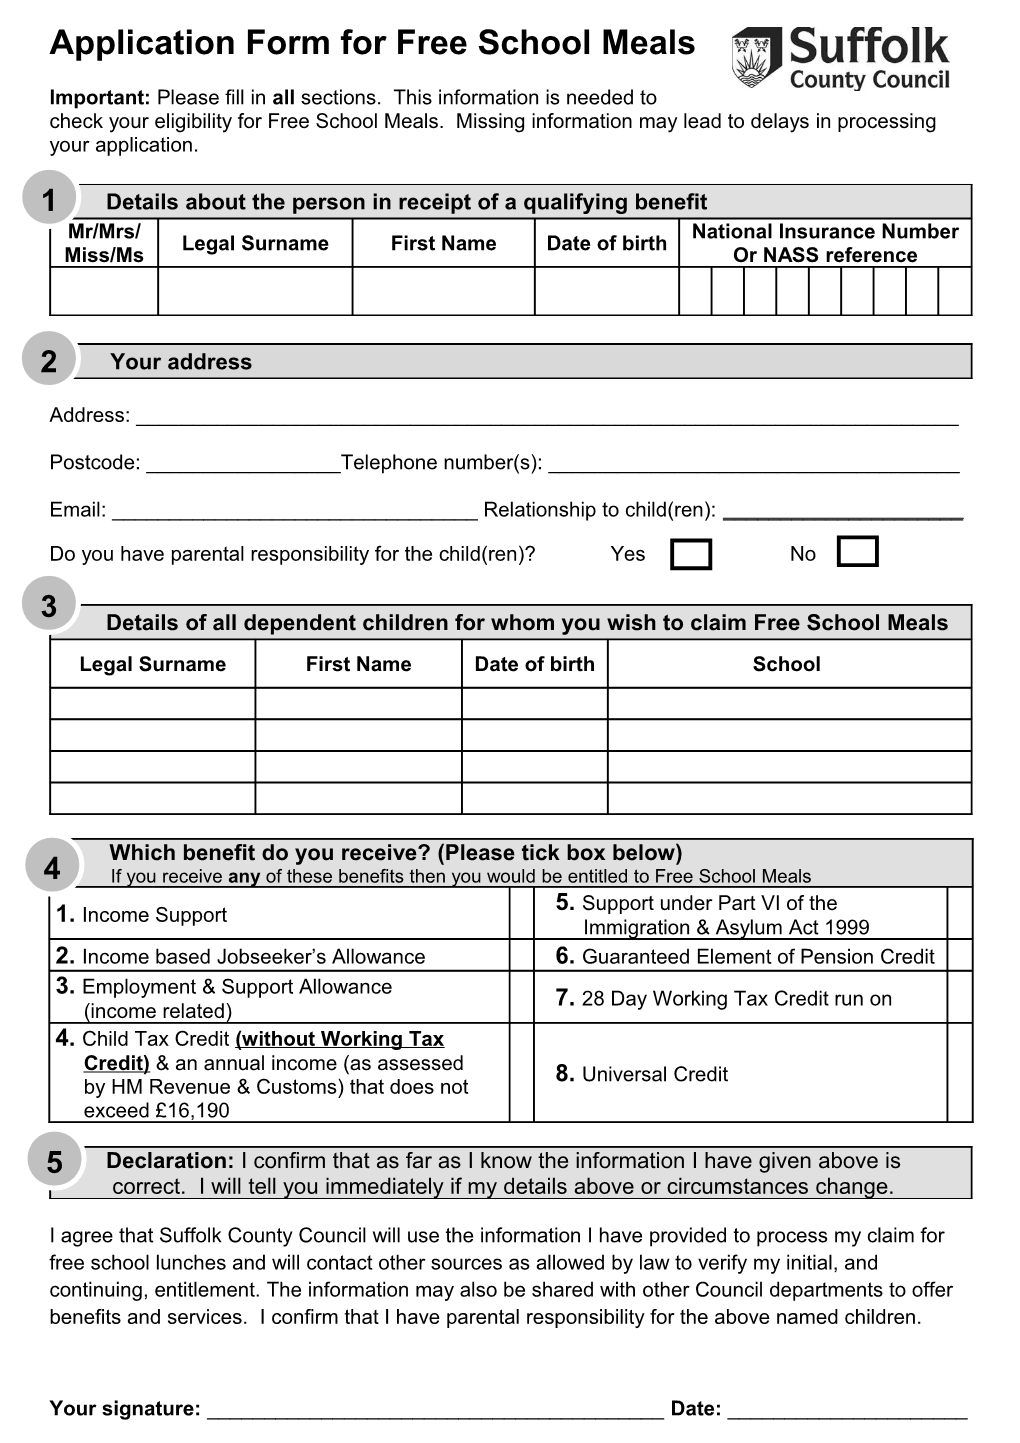 Application Form For s2